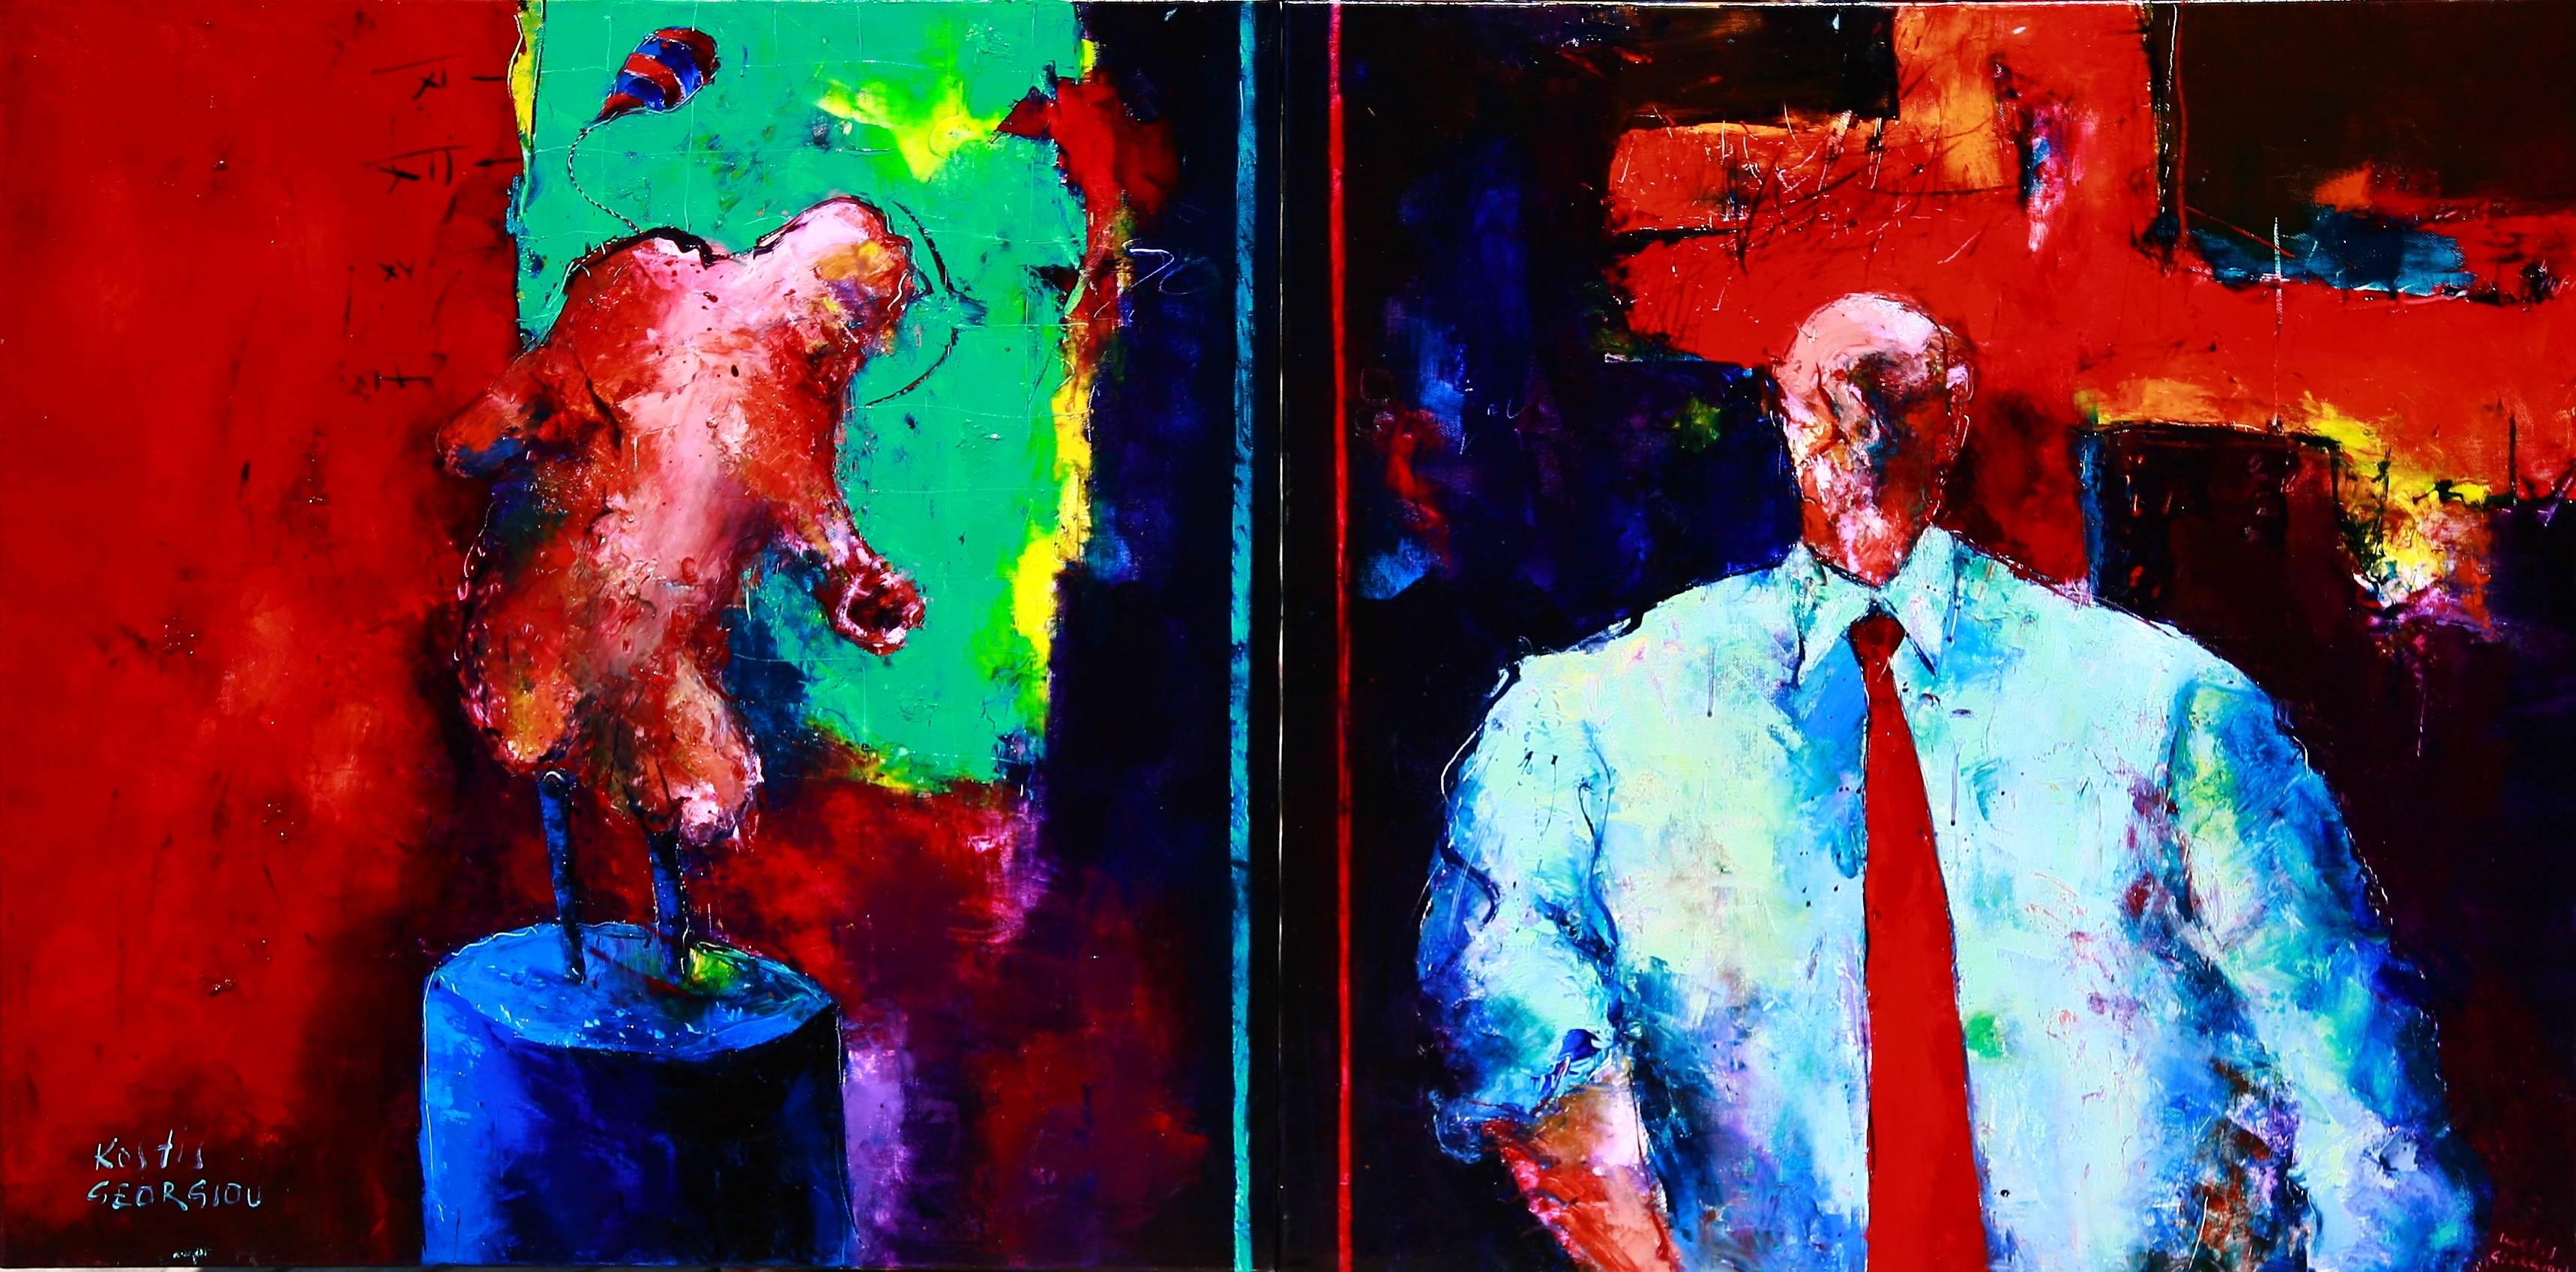 Oil on canvas (Diptych)
32 x 63 inches
80 x 160 cm

Born in Thessaloniki, Greece, Kostis Georgiou studied stage scenery in Florence (1981-1982), painting and sculpture in the School of Fine Arts, Athens (1982-1986) with Dimitris Mitaras and